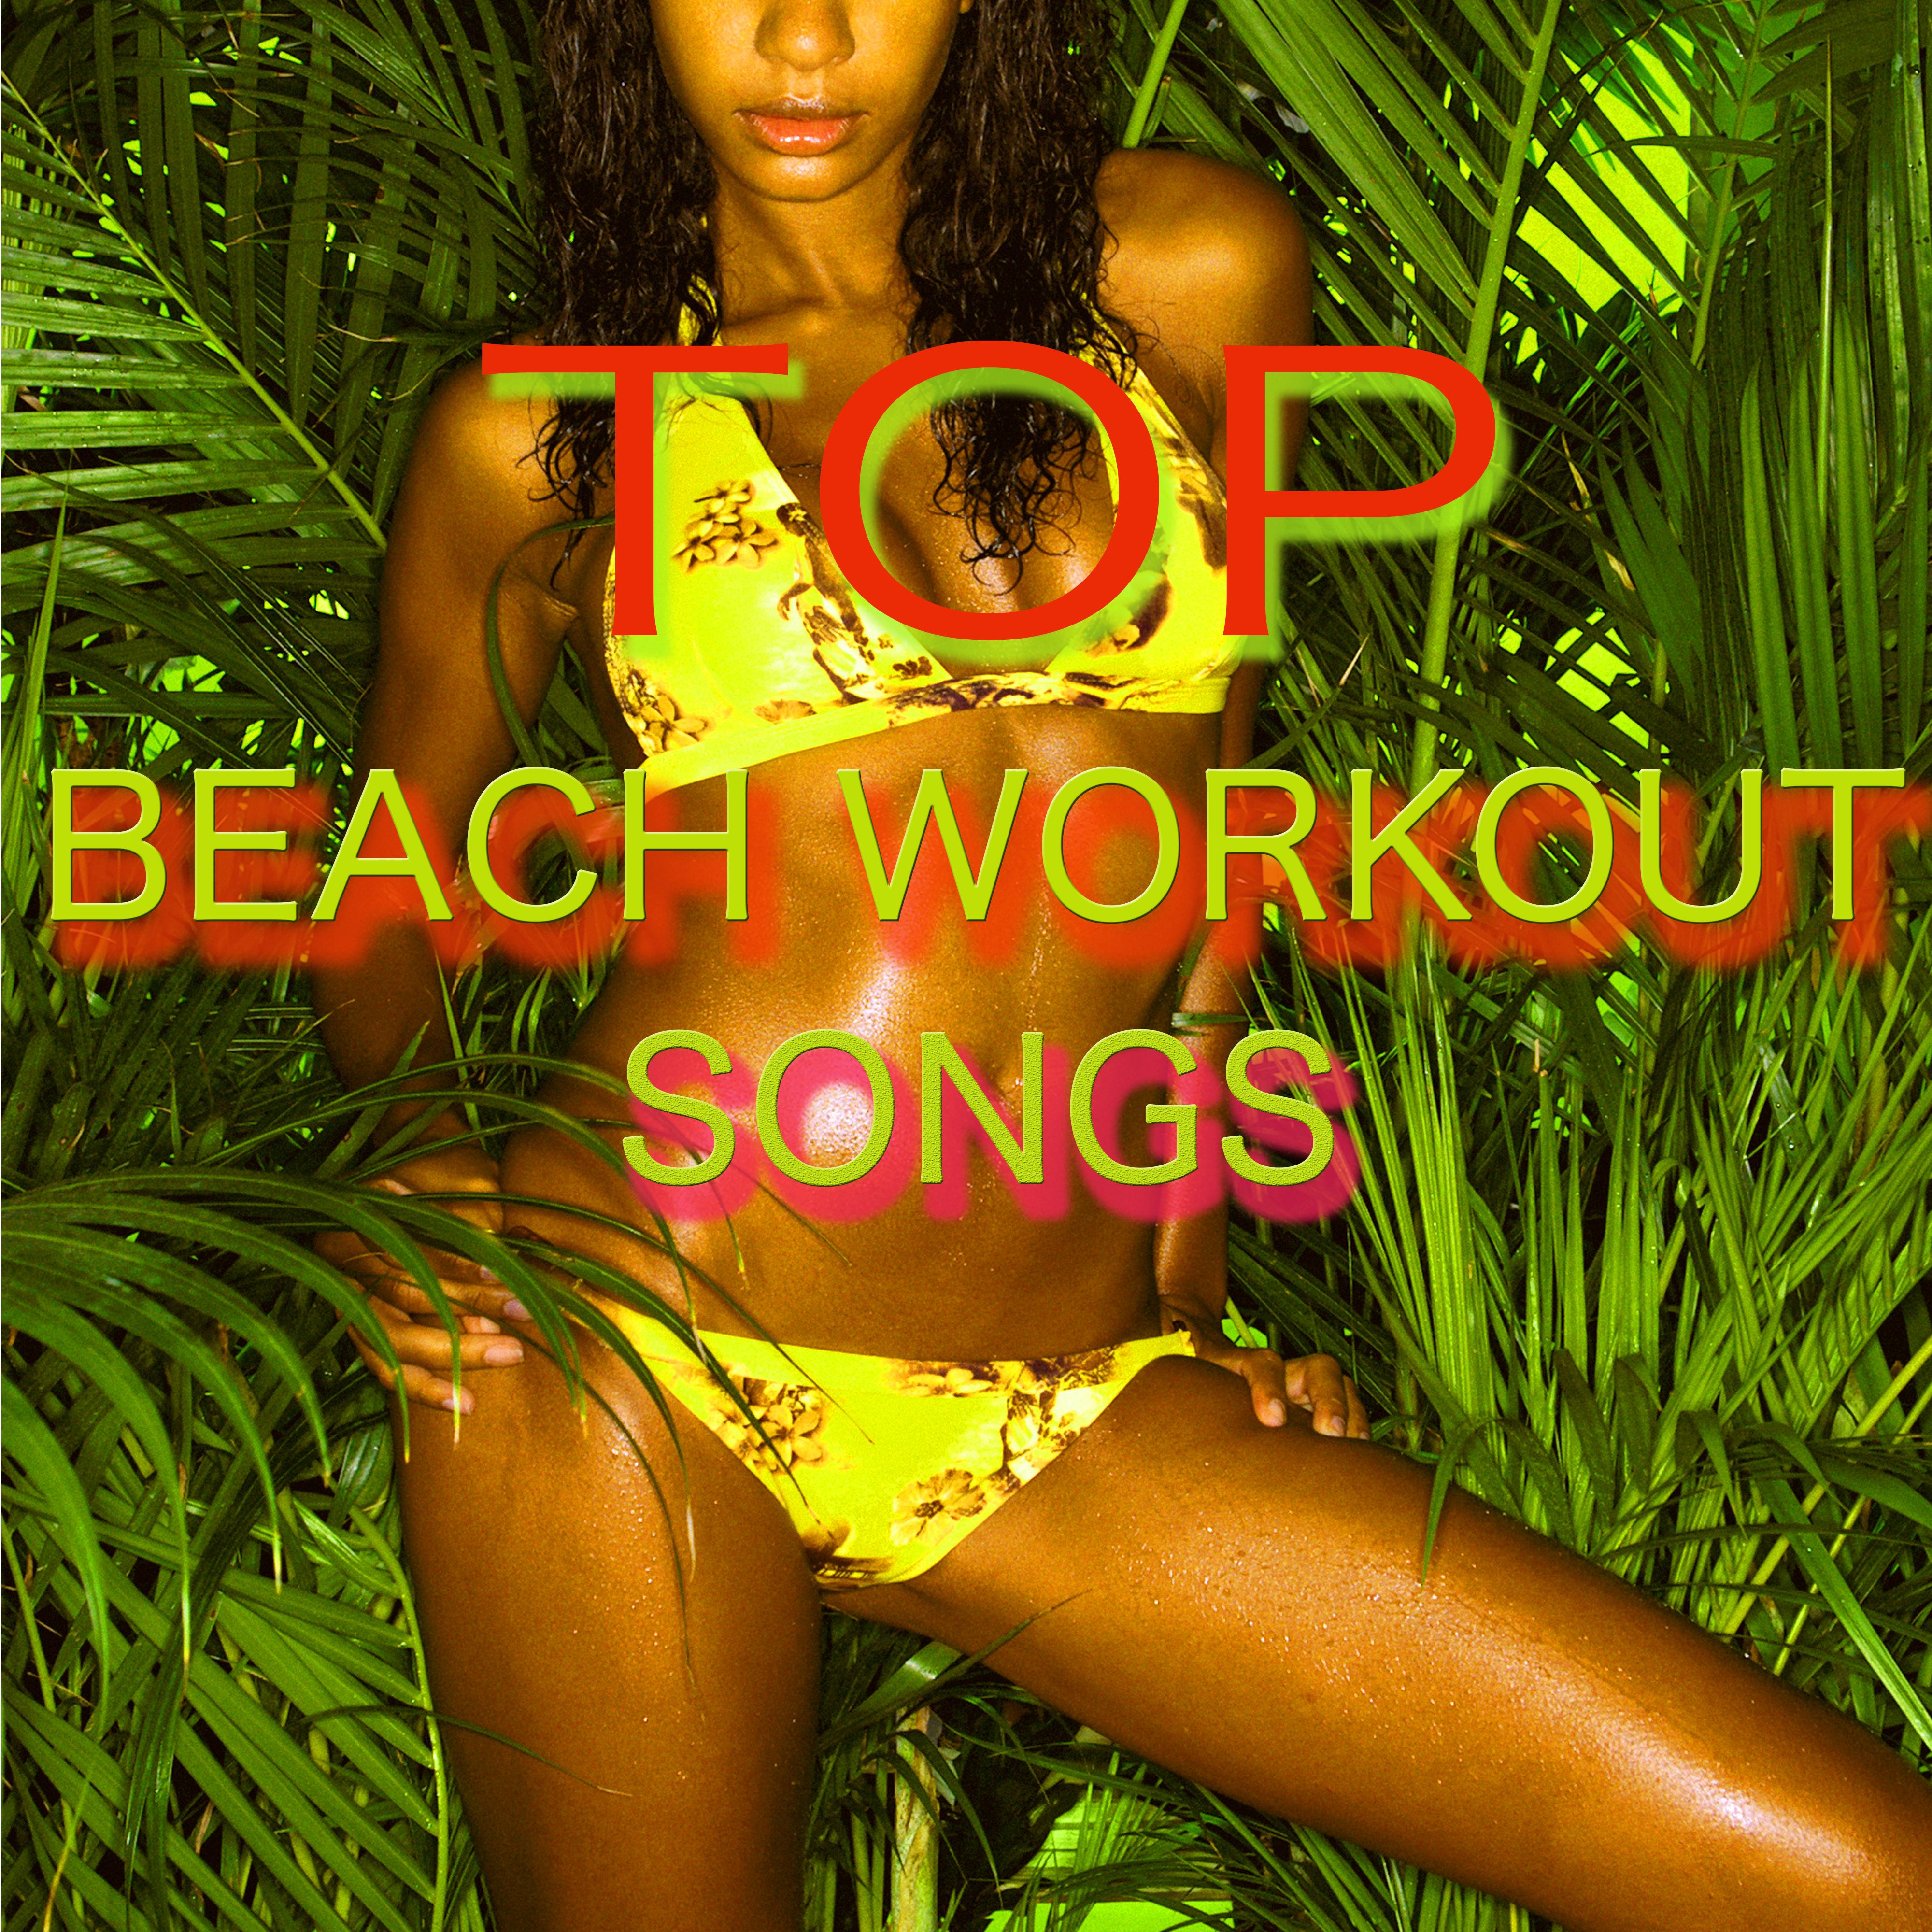 Top Beach Workout Songs  Best Workout Music for Cardio, Weight Loss, Yoga for Weight Loss, Bikini Body Motivational Music